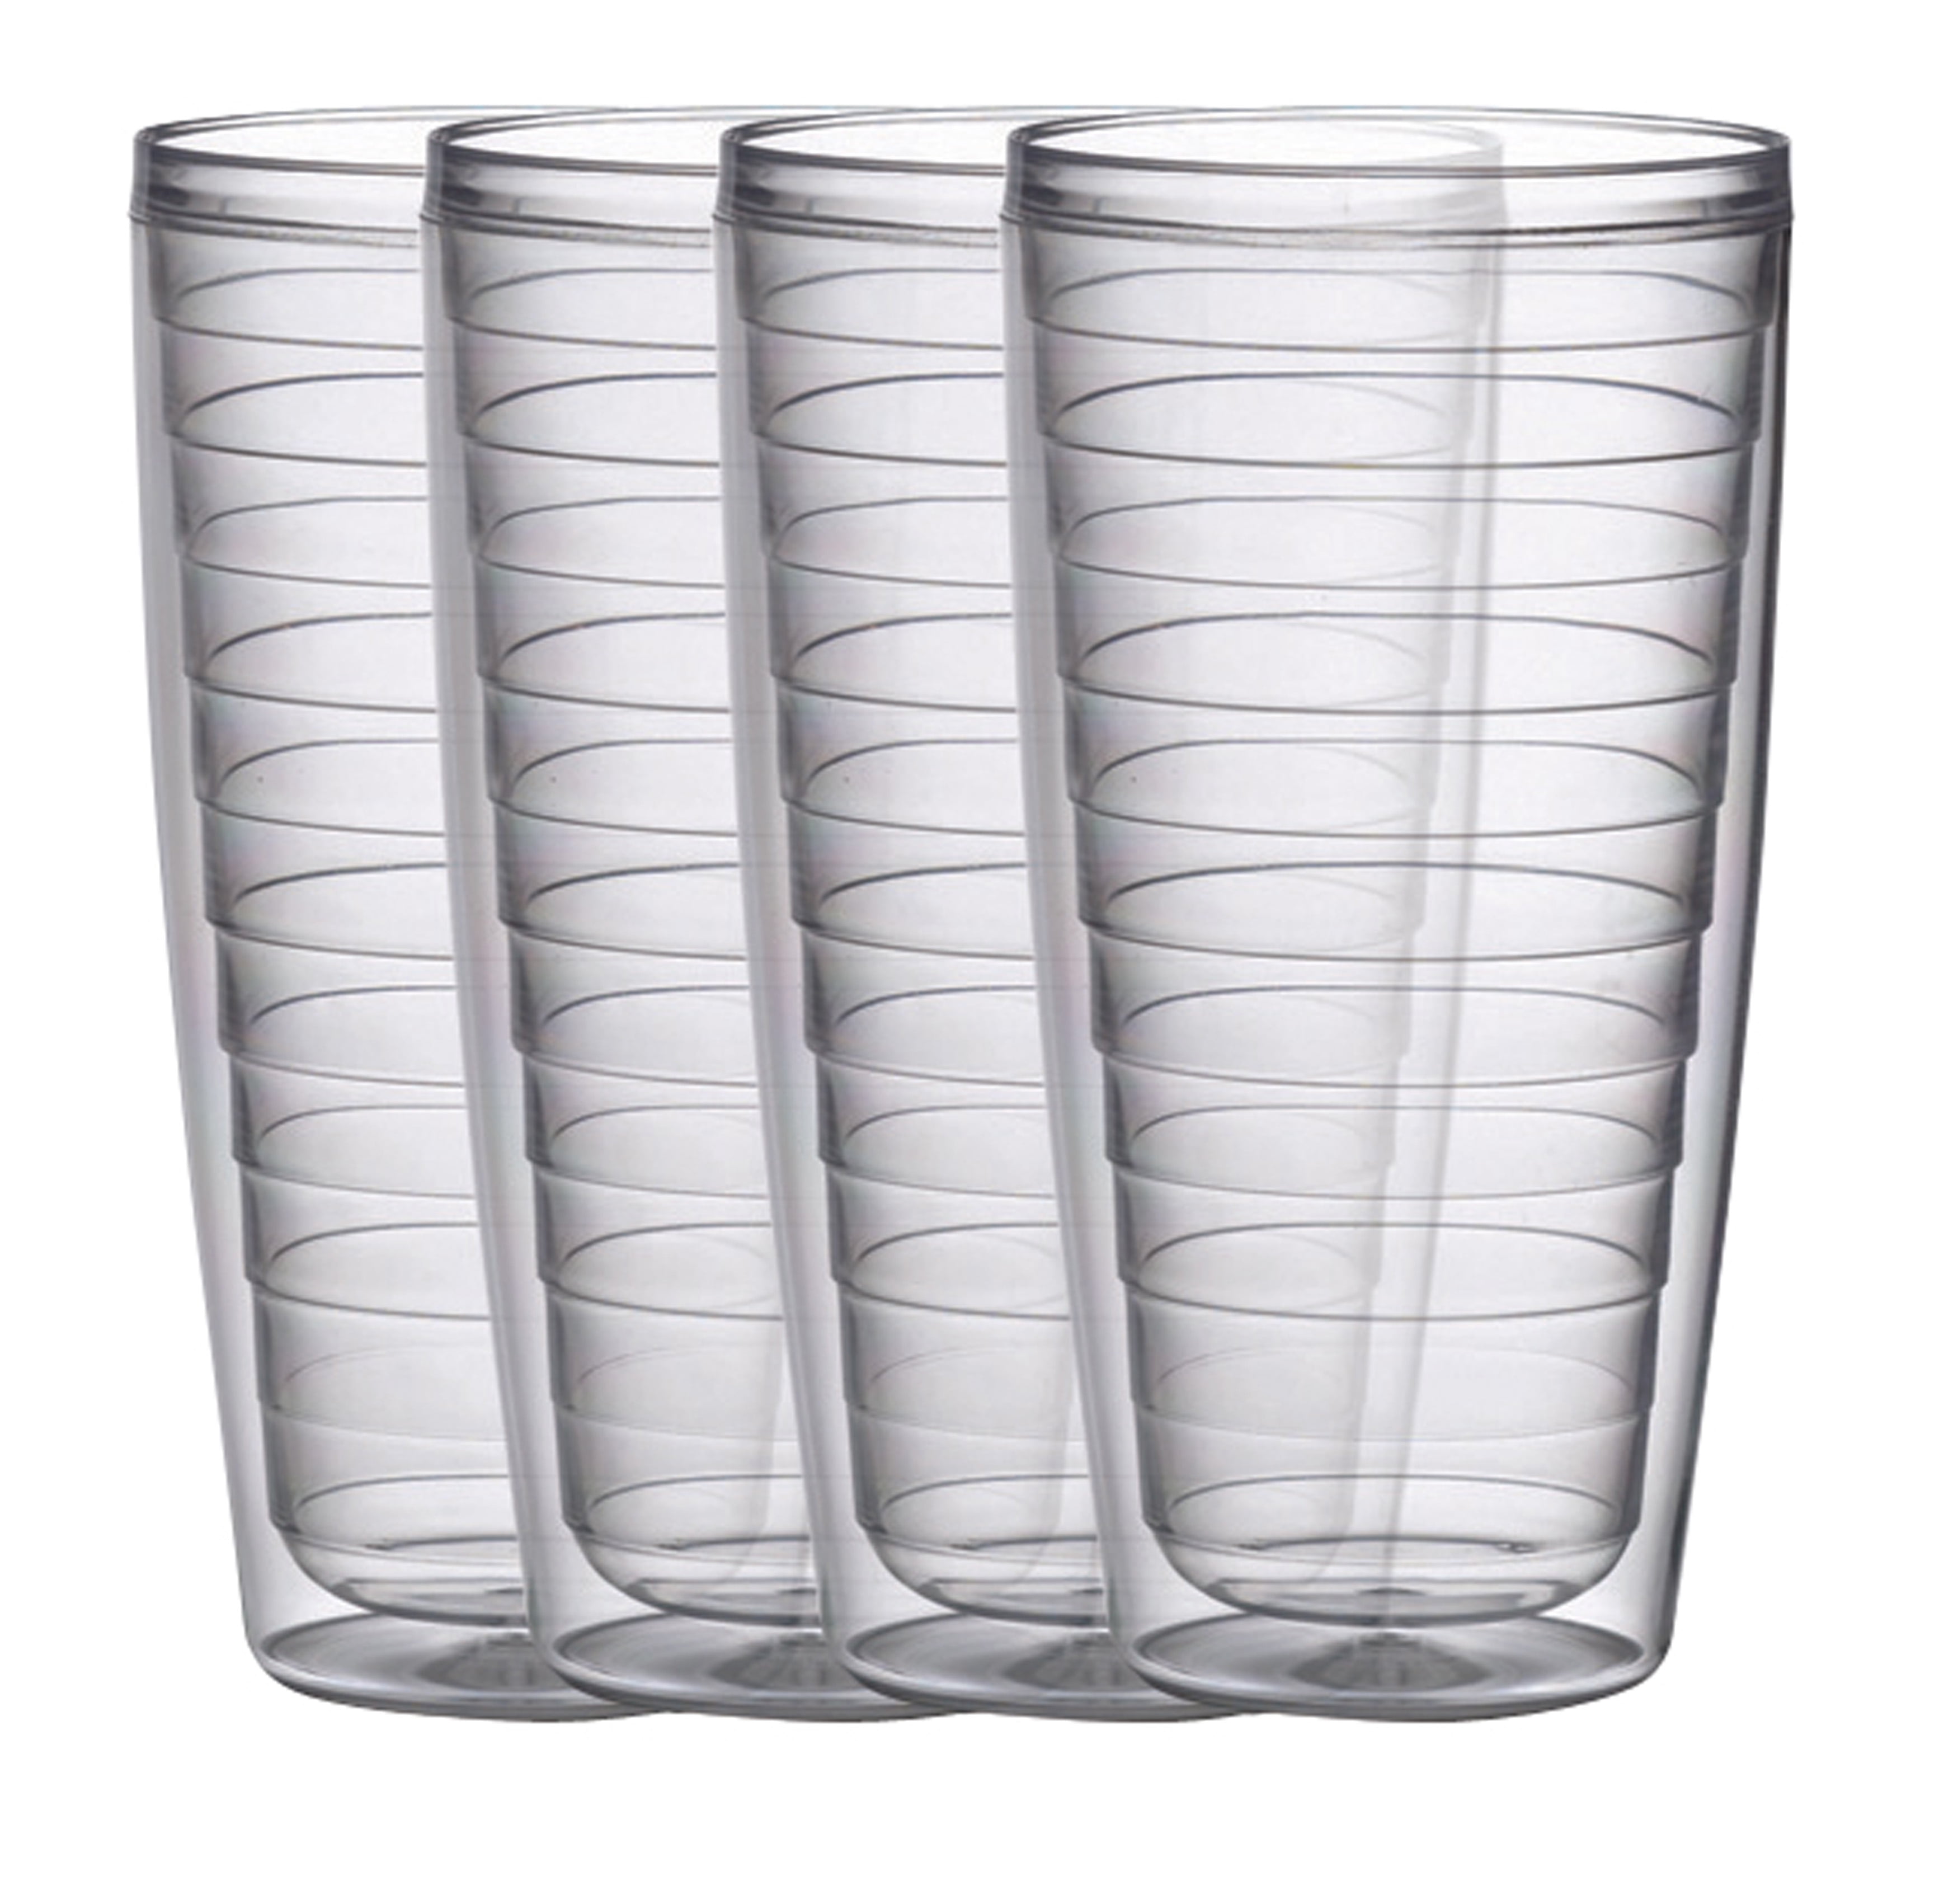 Boston Warehouse 24oz Insulated Tumblers, Clear, Set of 4